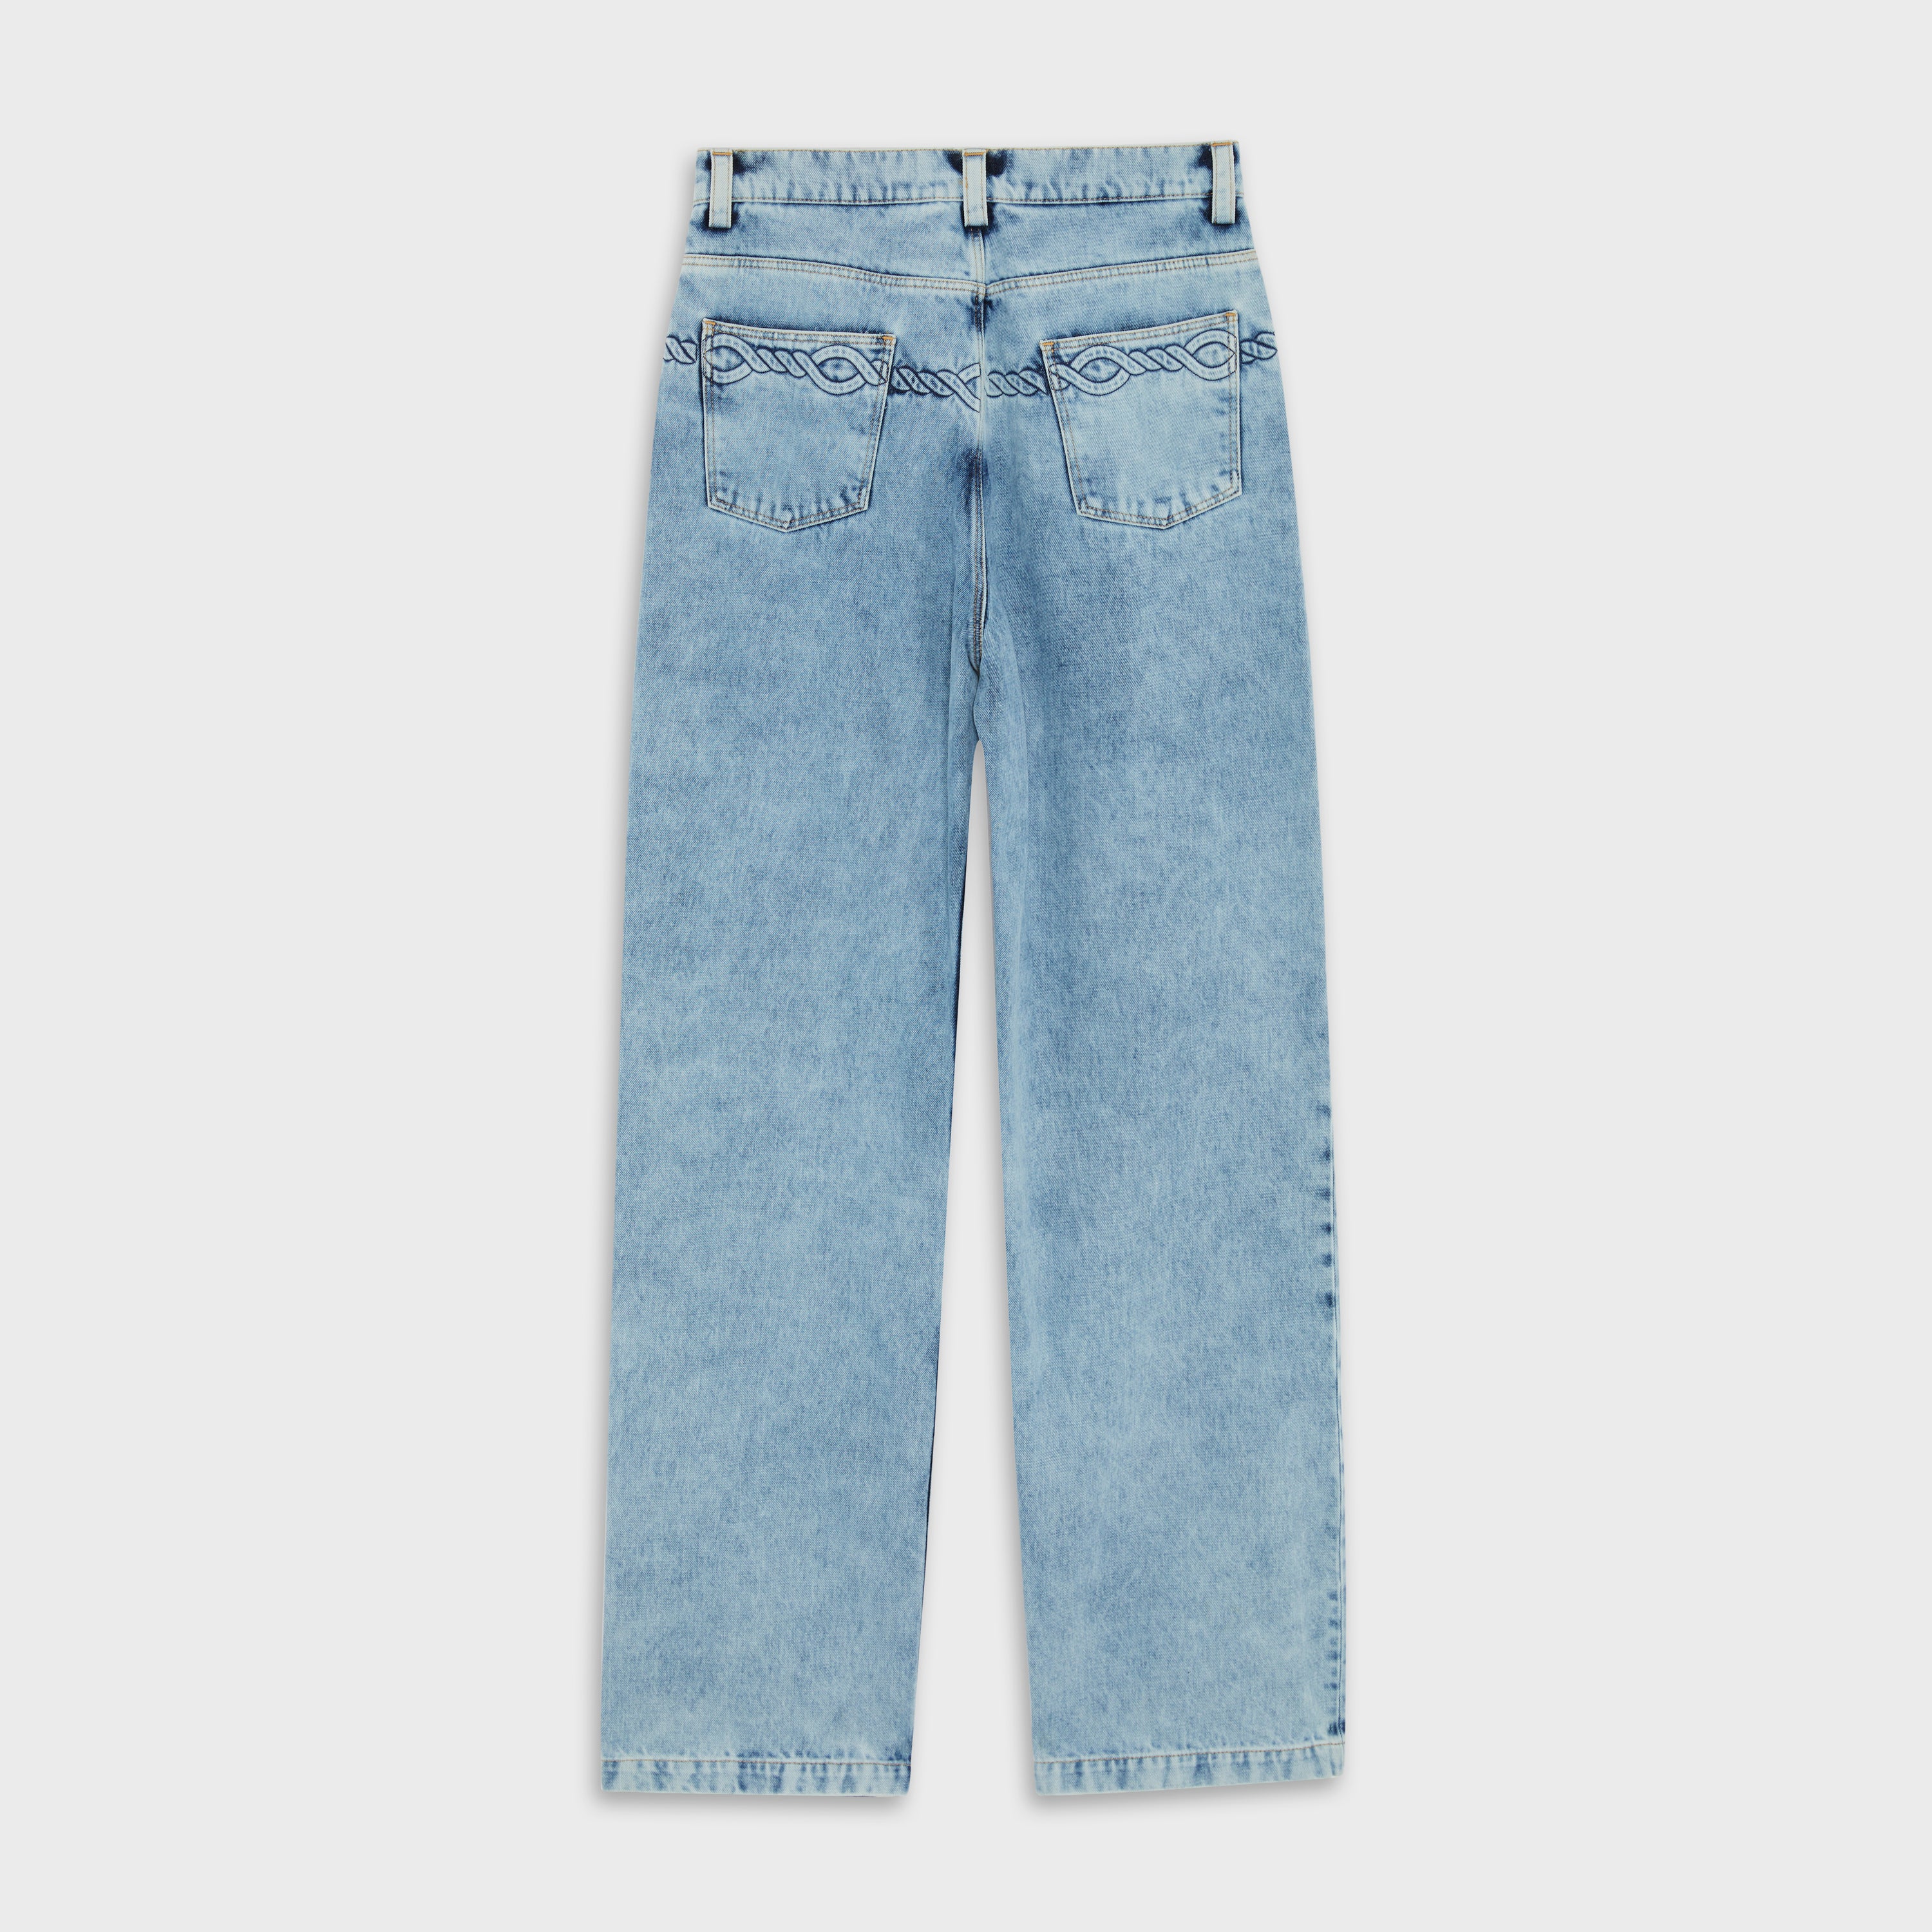 Cable Corded Jeans in Washed Indigo